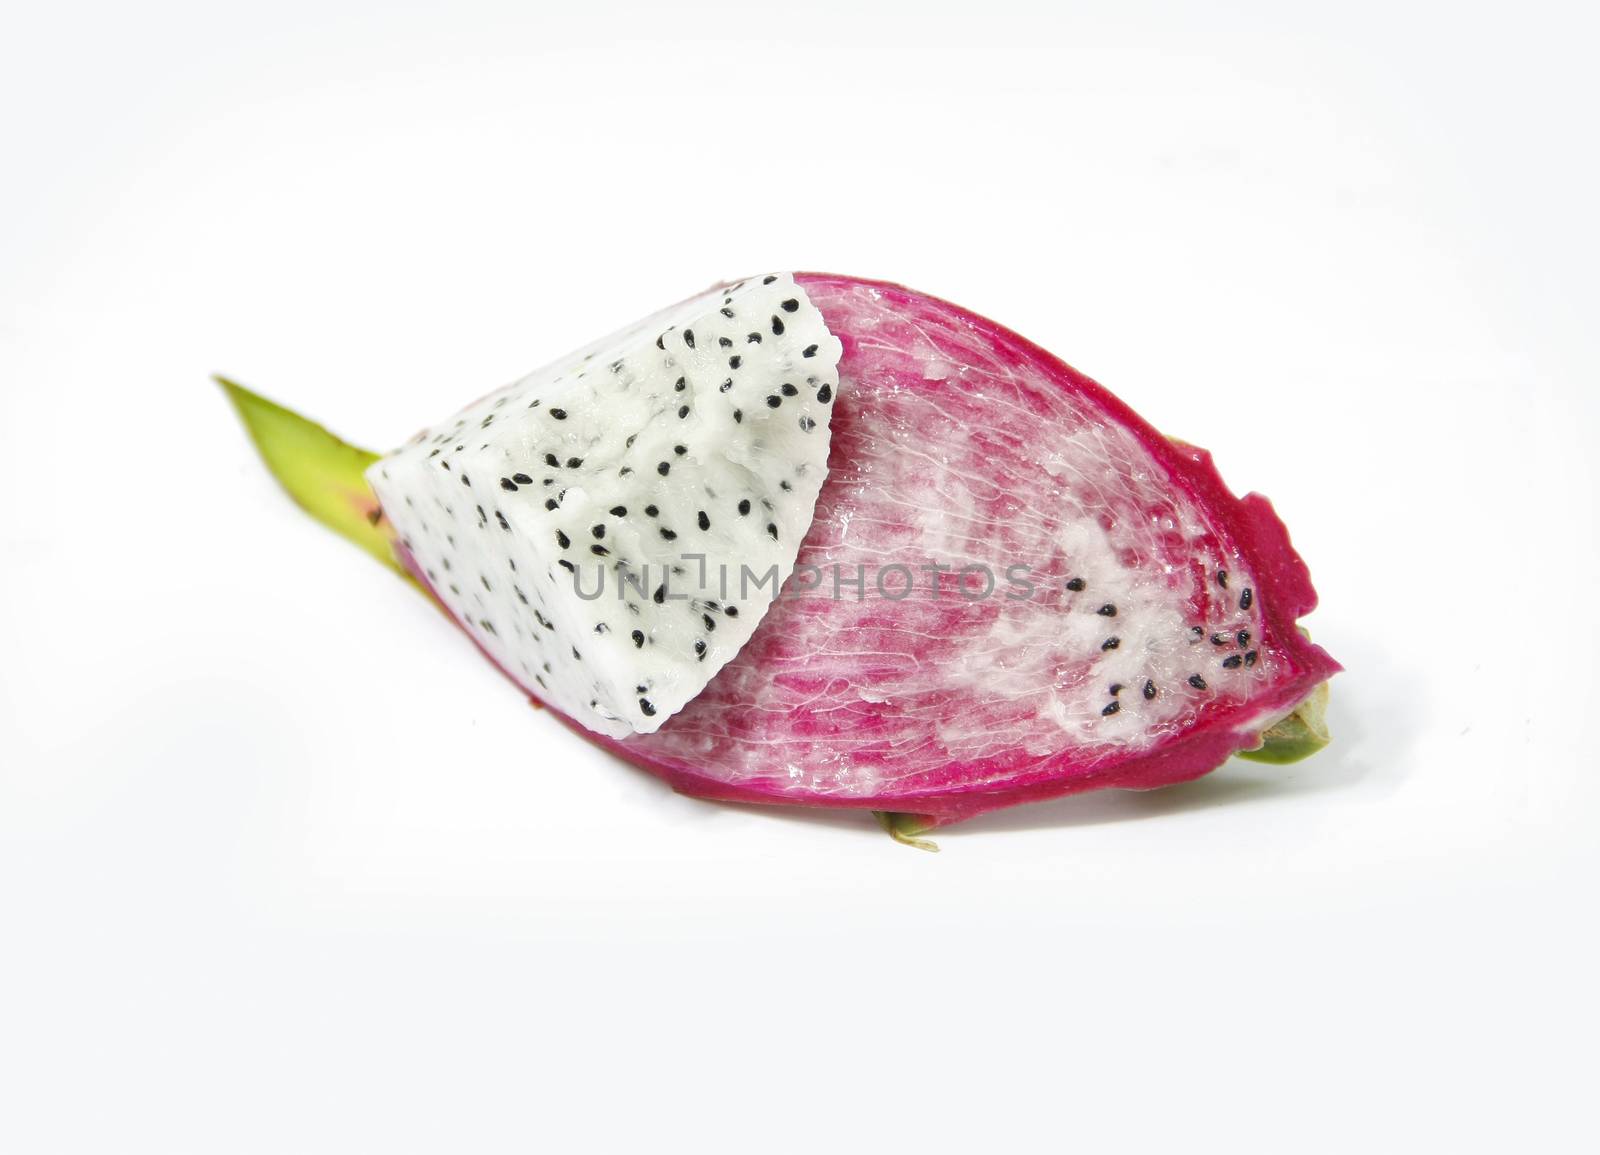 beautiful red dragon fruit on white background